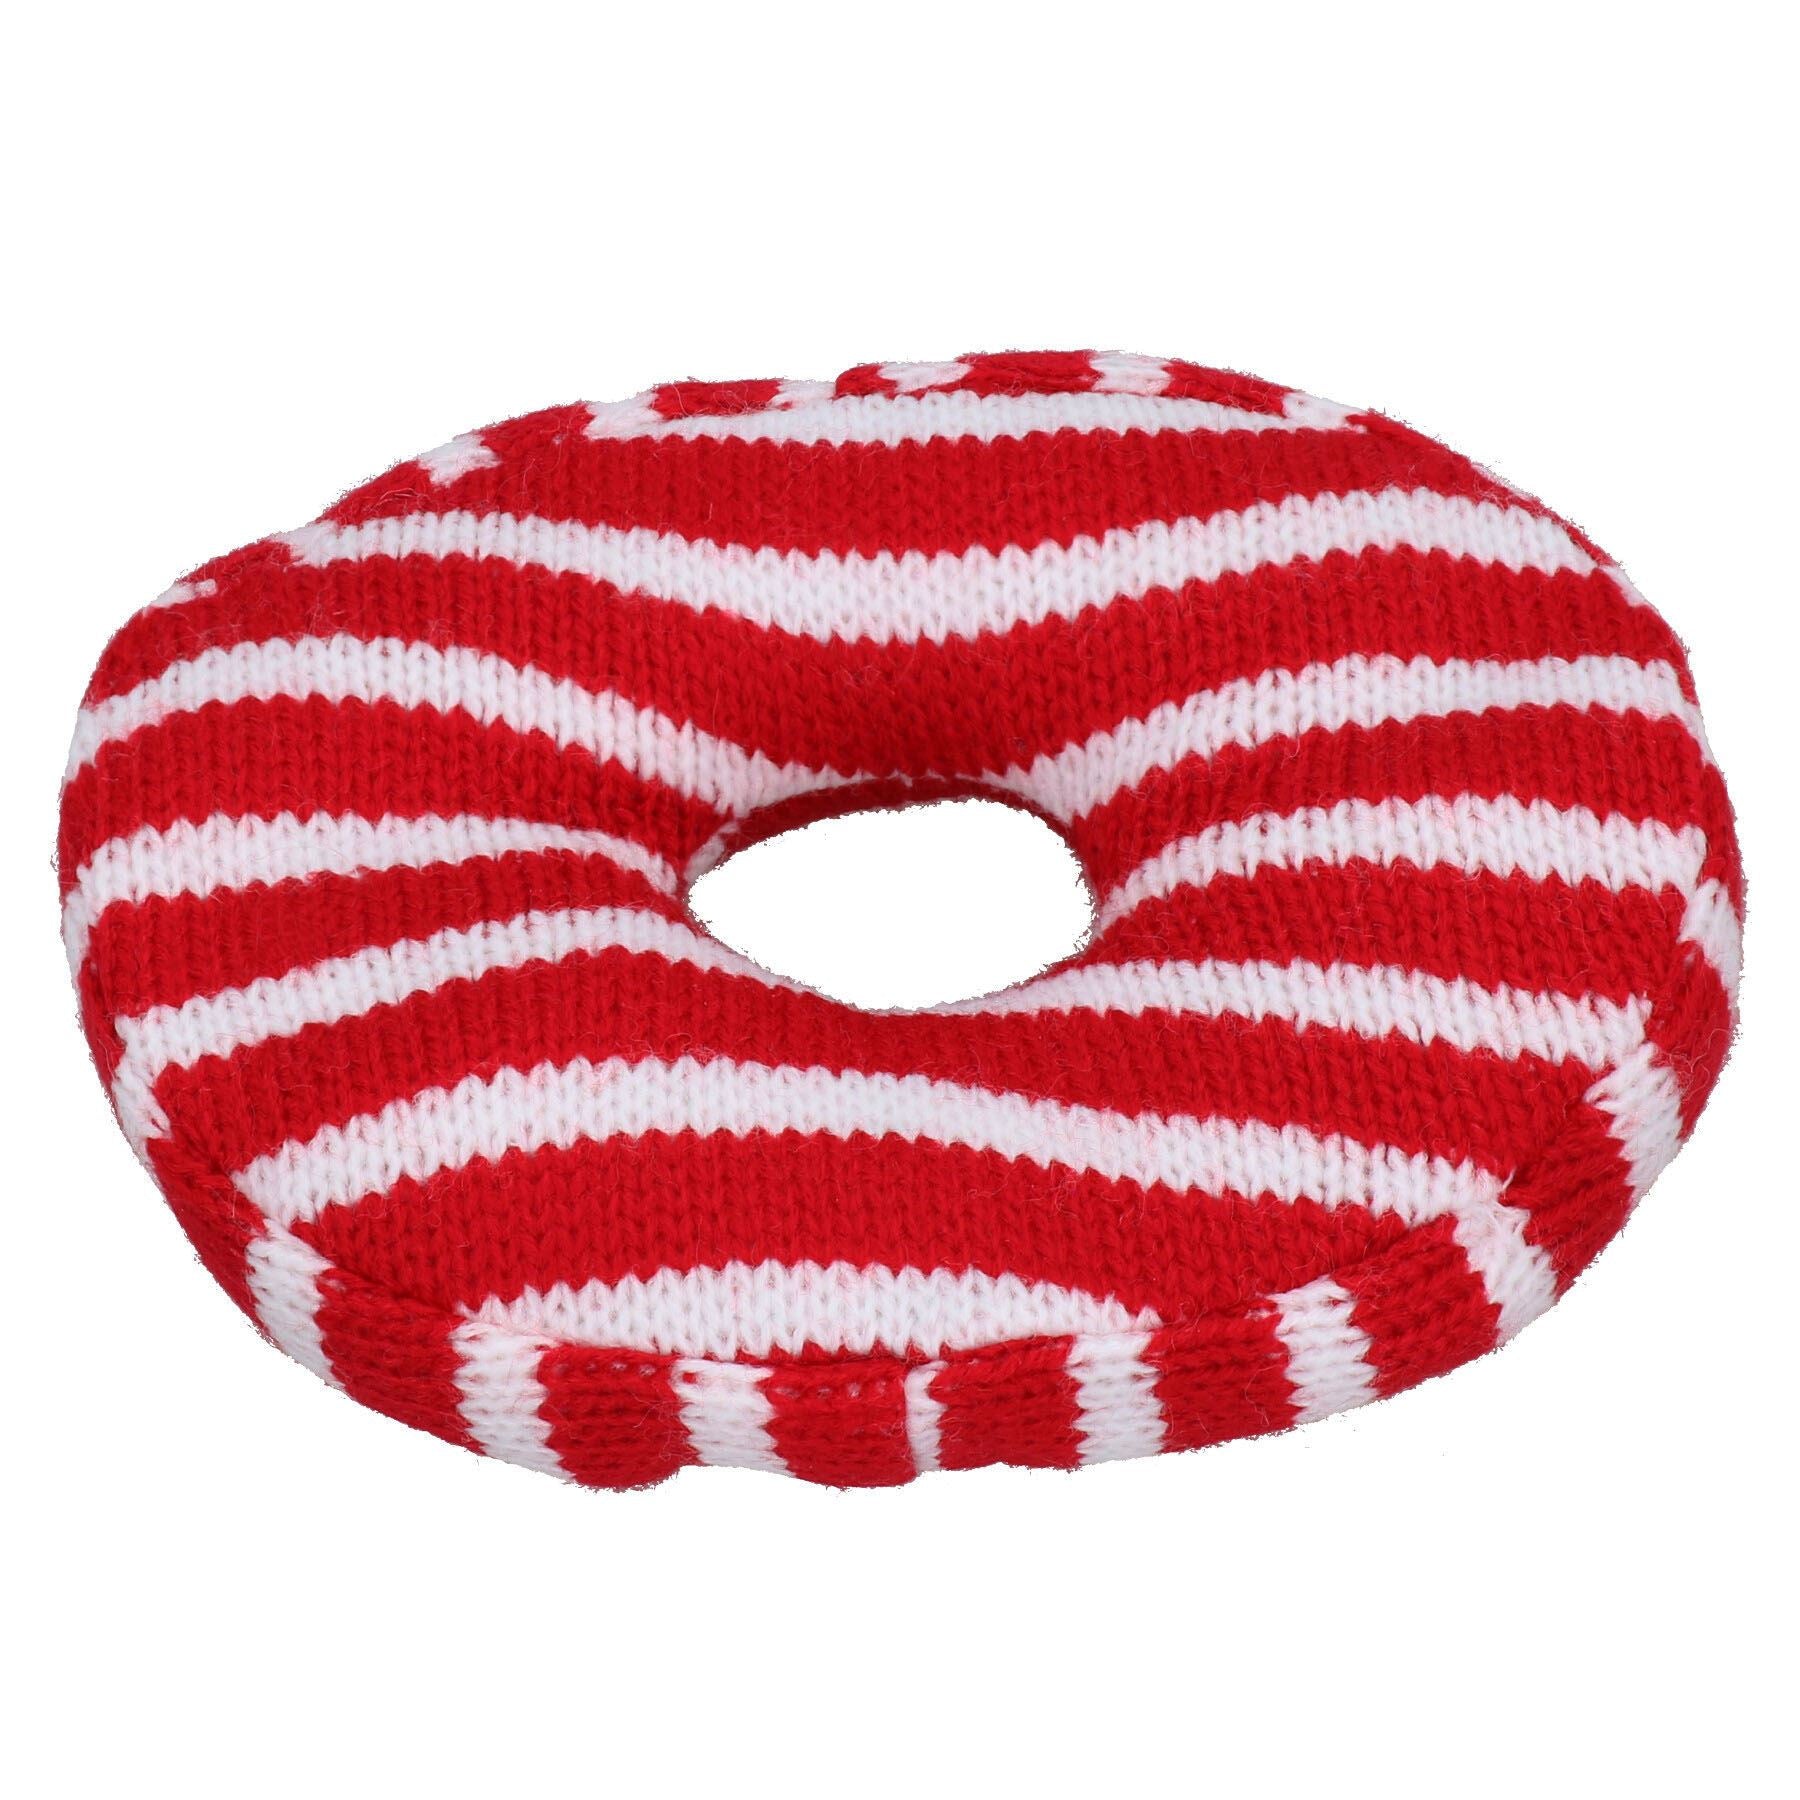 Dog Christmas Gift Set of 3 Doggy Doughnuts Soft Knitted Dog Play Toy